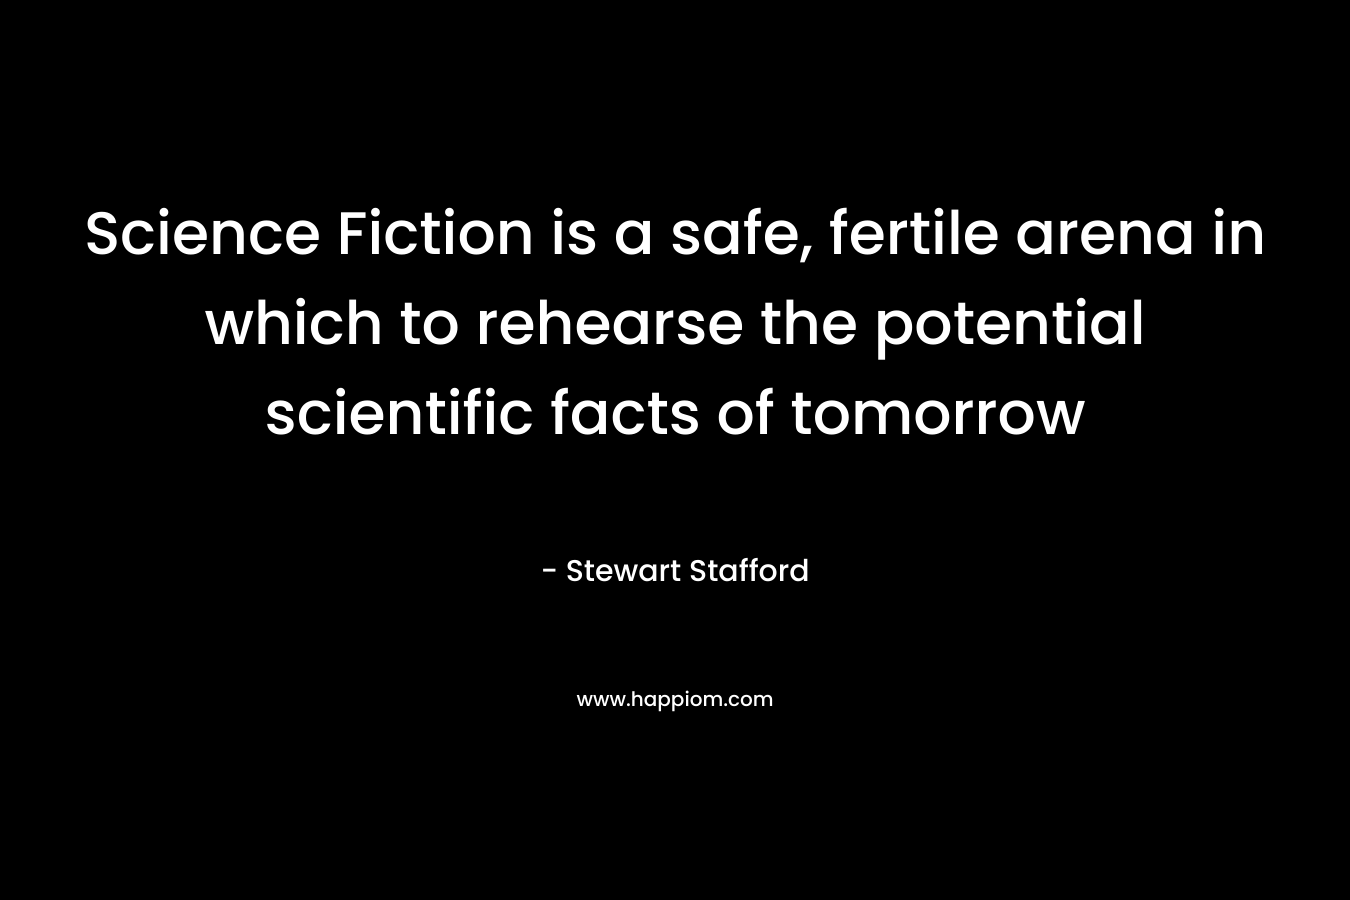 Science Fiction is a safe, fertile arena in which to rehearse the potential scientific facts of tomorrow